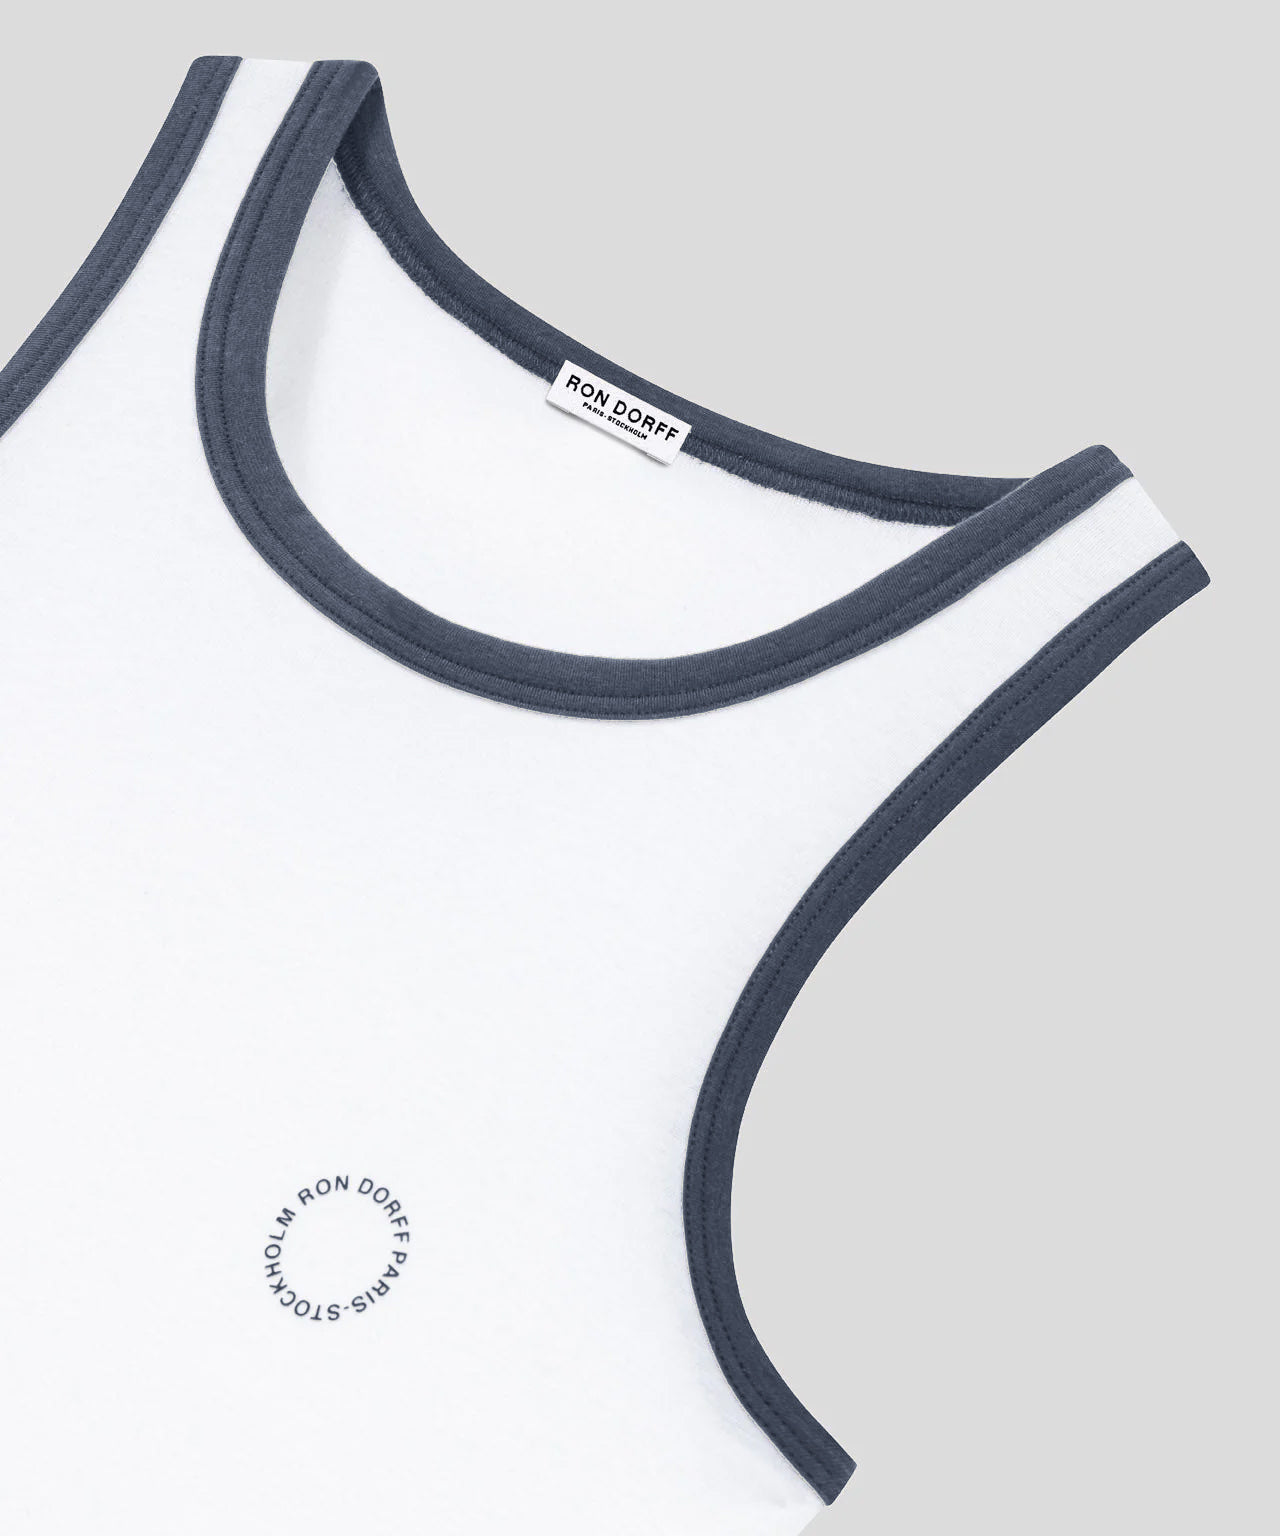 Ribbed Sports Tank Top: White/Skyfall